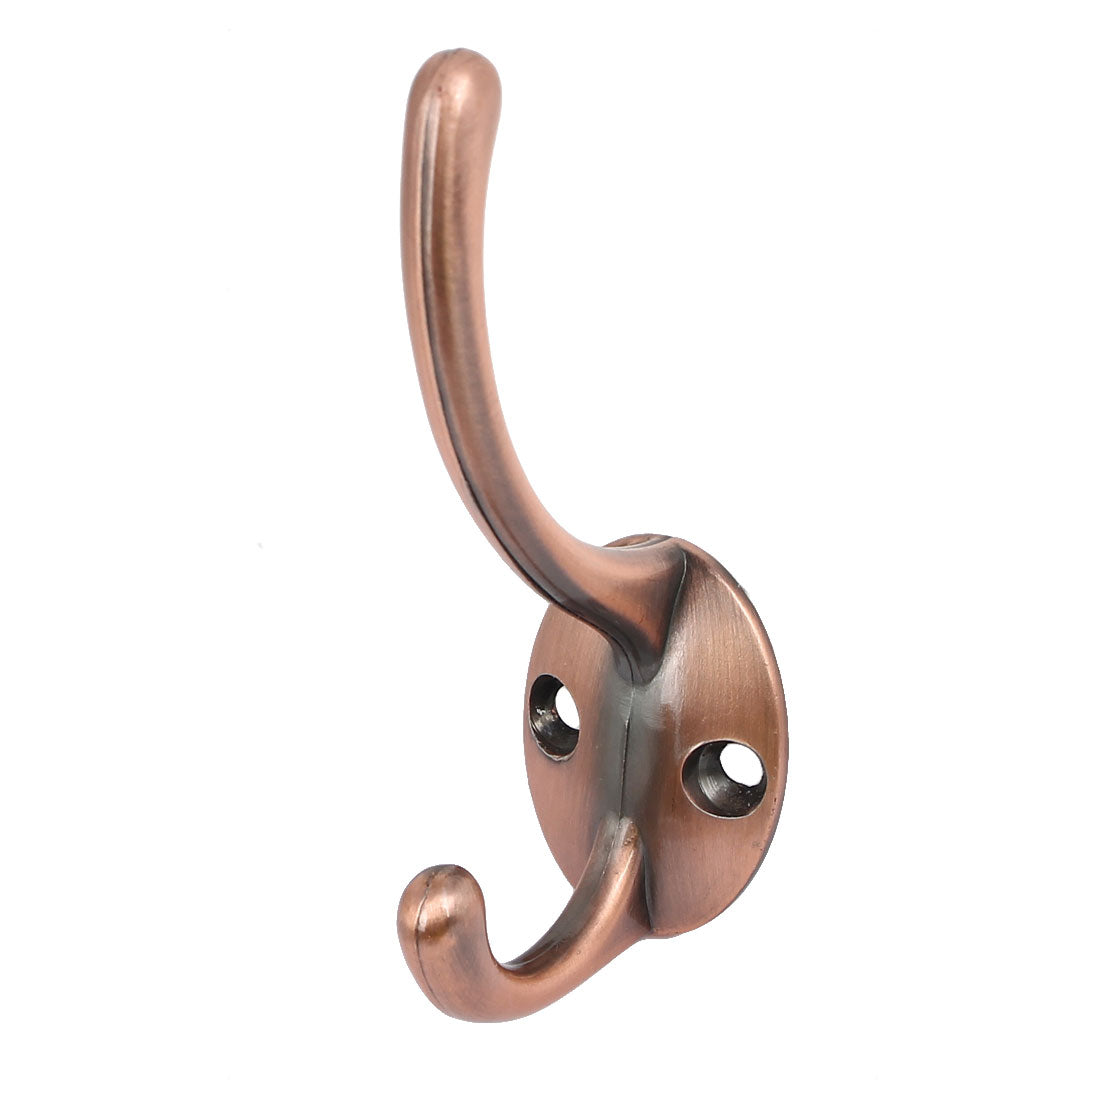 uxcell Uxcell Bathroom Robe Coat Hanging Vintage Style Double Hanger Hooks Copper Tone 2pcs